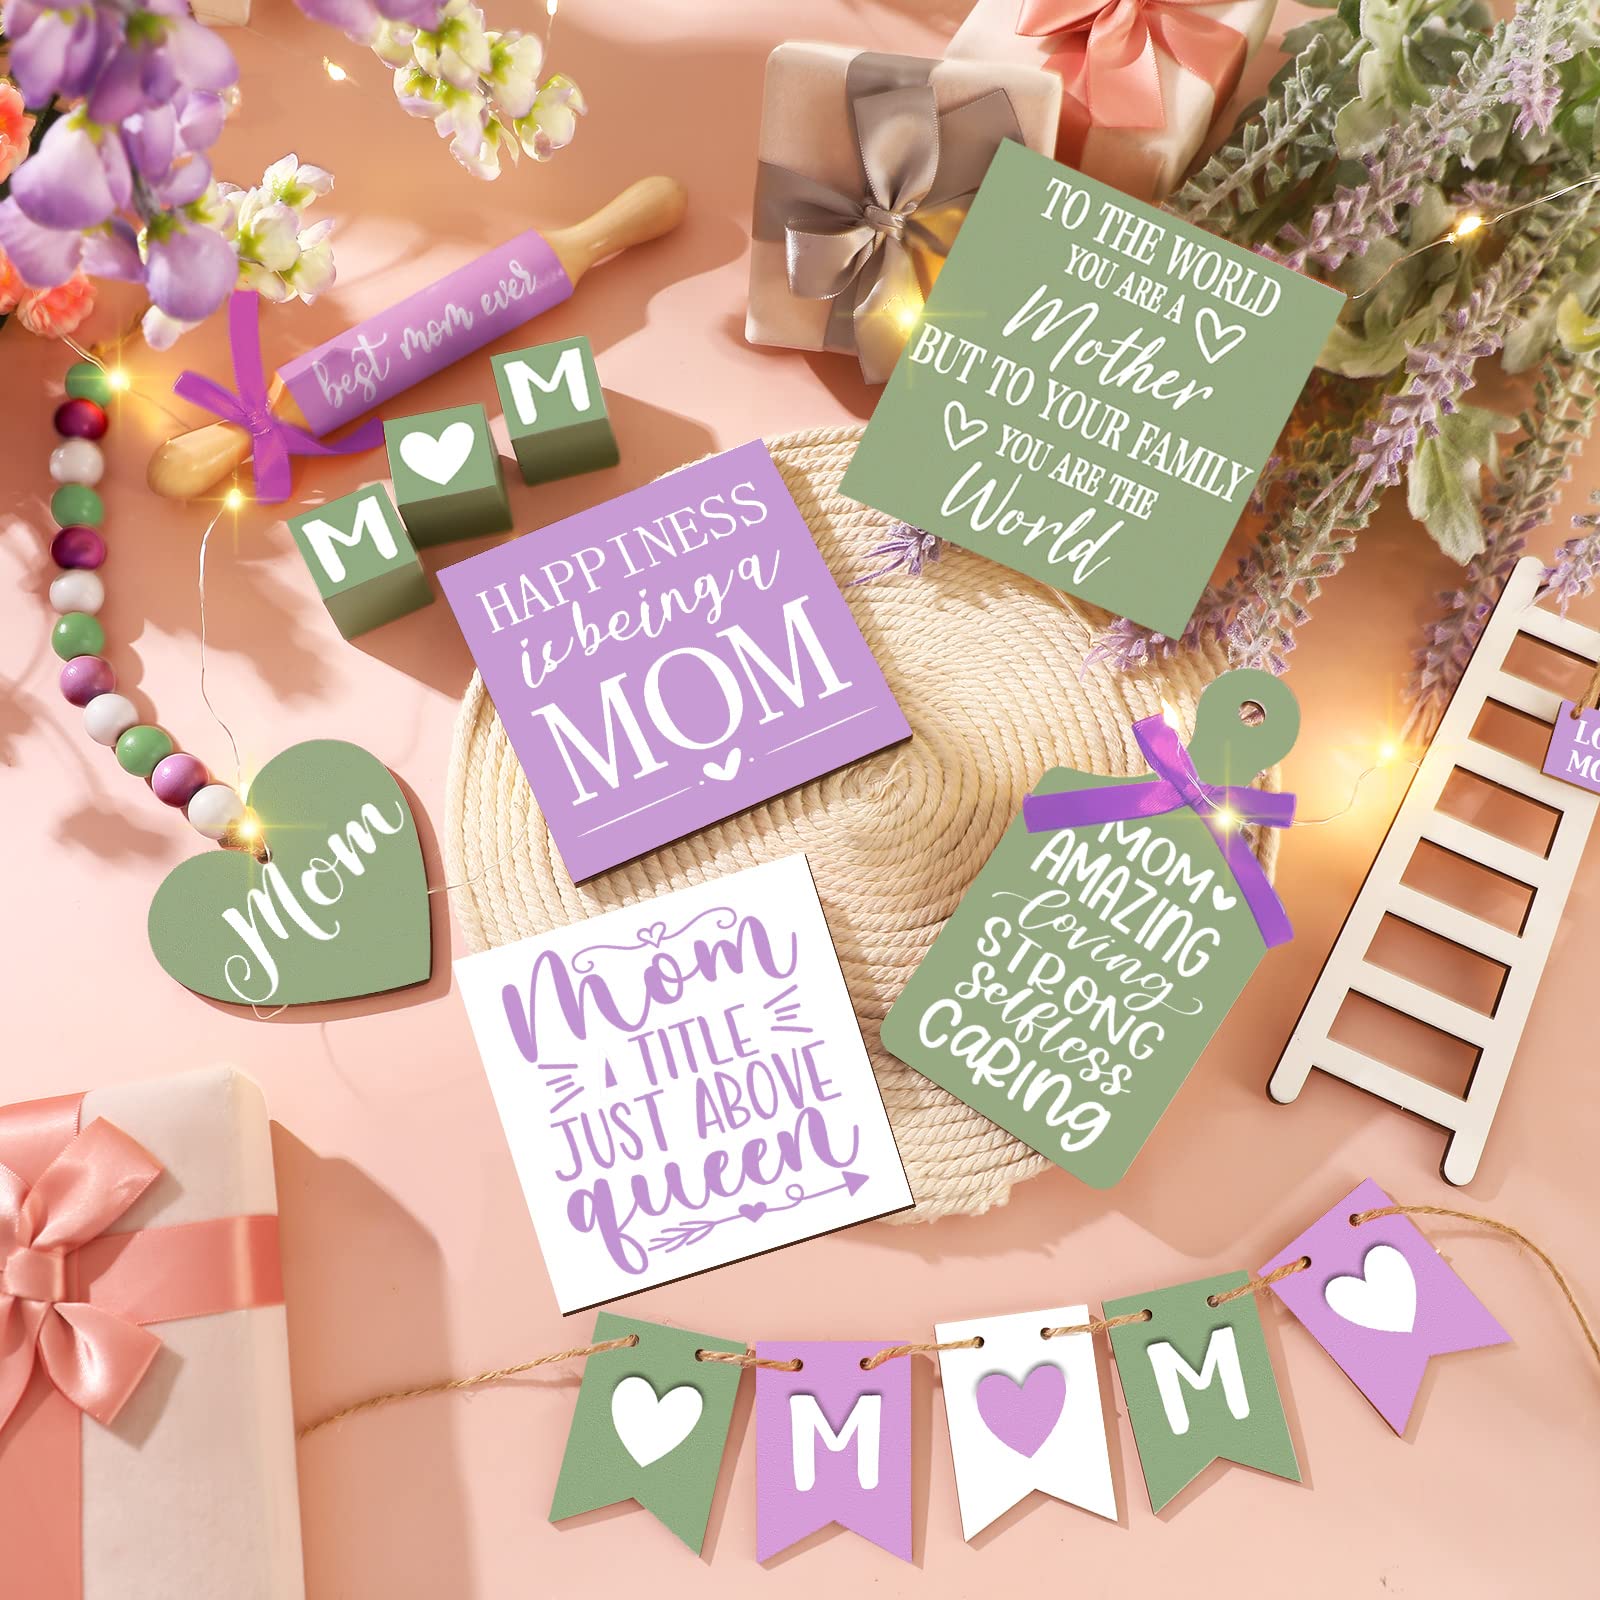 15 Pcs Mother's Day Tiered Tray Decor Happy Mother's Day Lavender Wood Signs Farmhouse Decorations Wooden Heart Bead Garland with LED String Lights for Mothers Gift Tabletop, Purple, Green